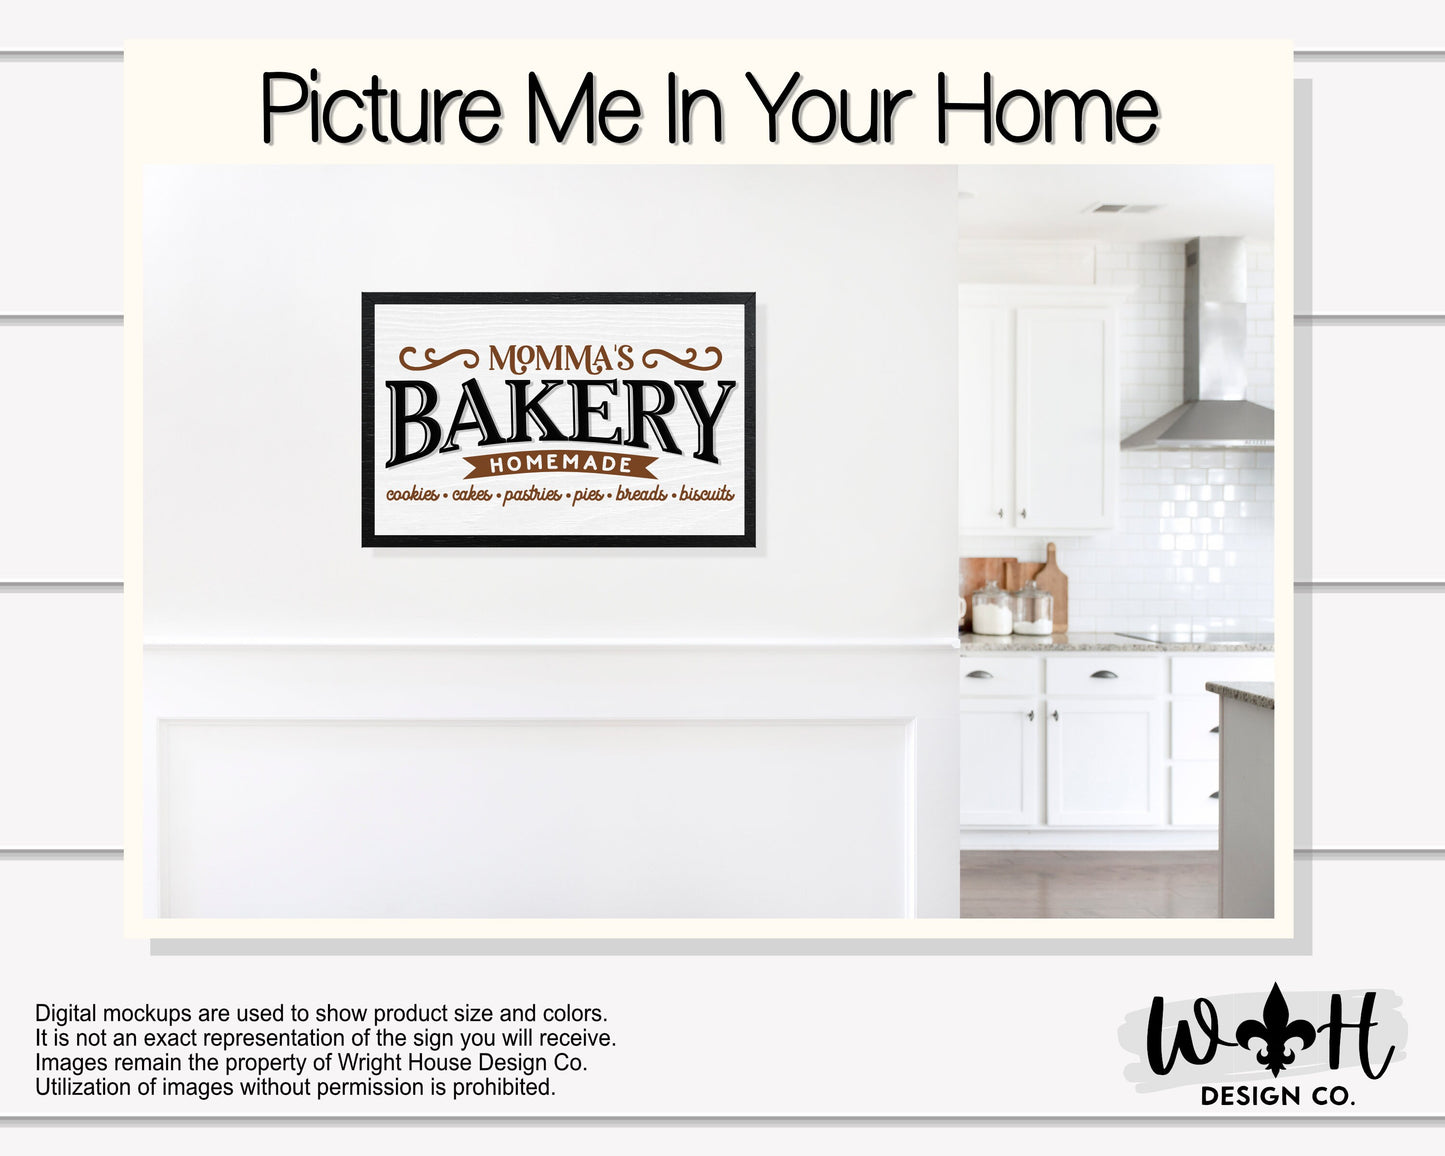 Momma’s Bakery - Homemade Cookies Cakes - Coffee Bar Sign - Seasonal Farmhouse Home and Kitchen Decor - Handcrafted Wooden Framed Wall Art